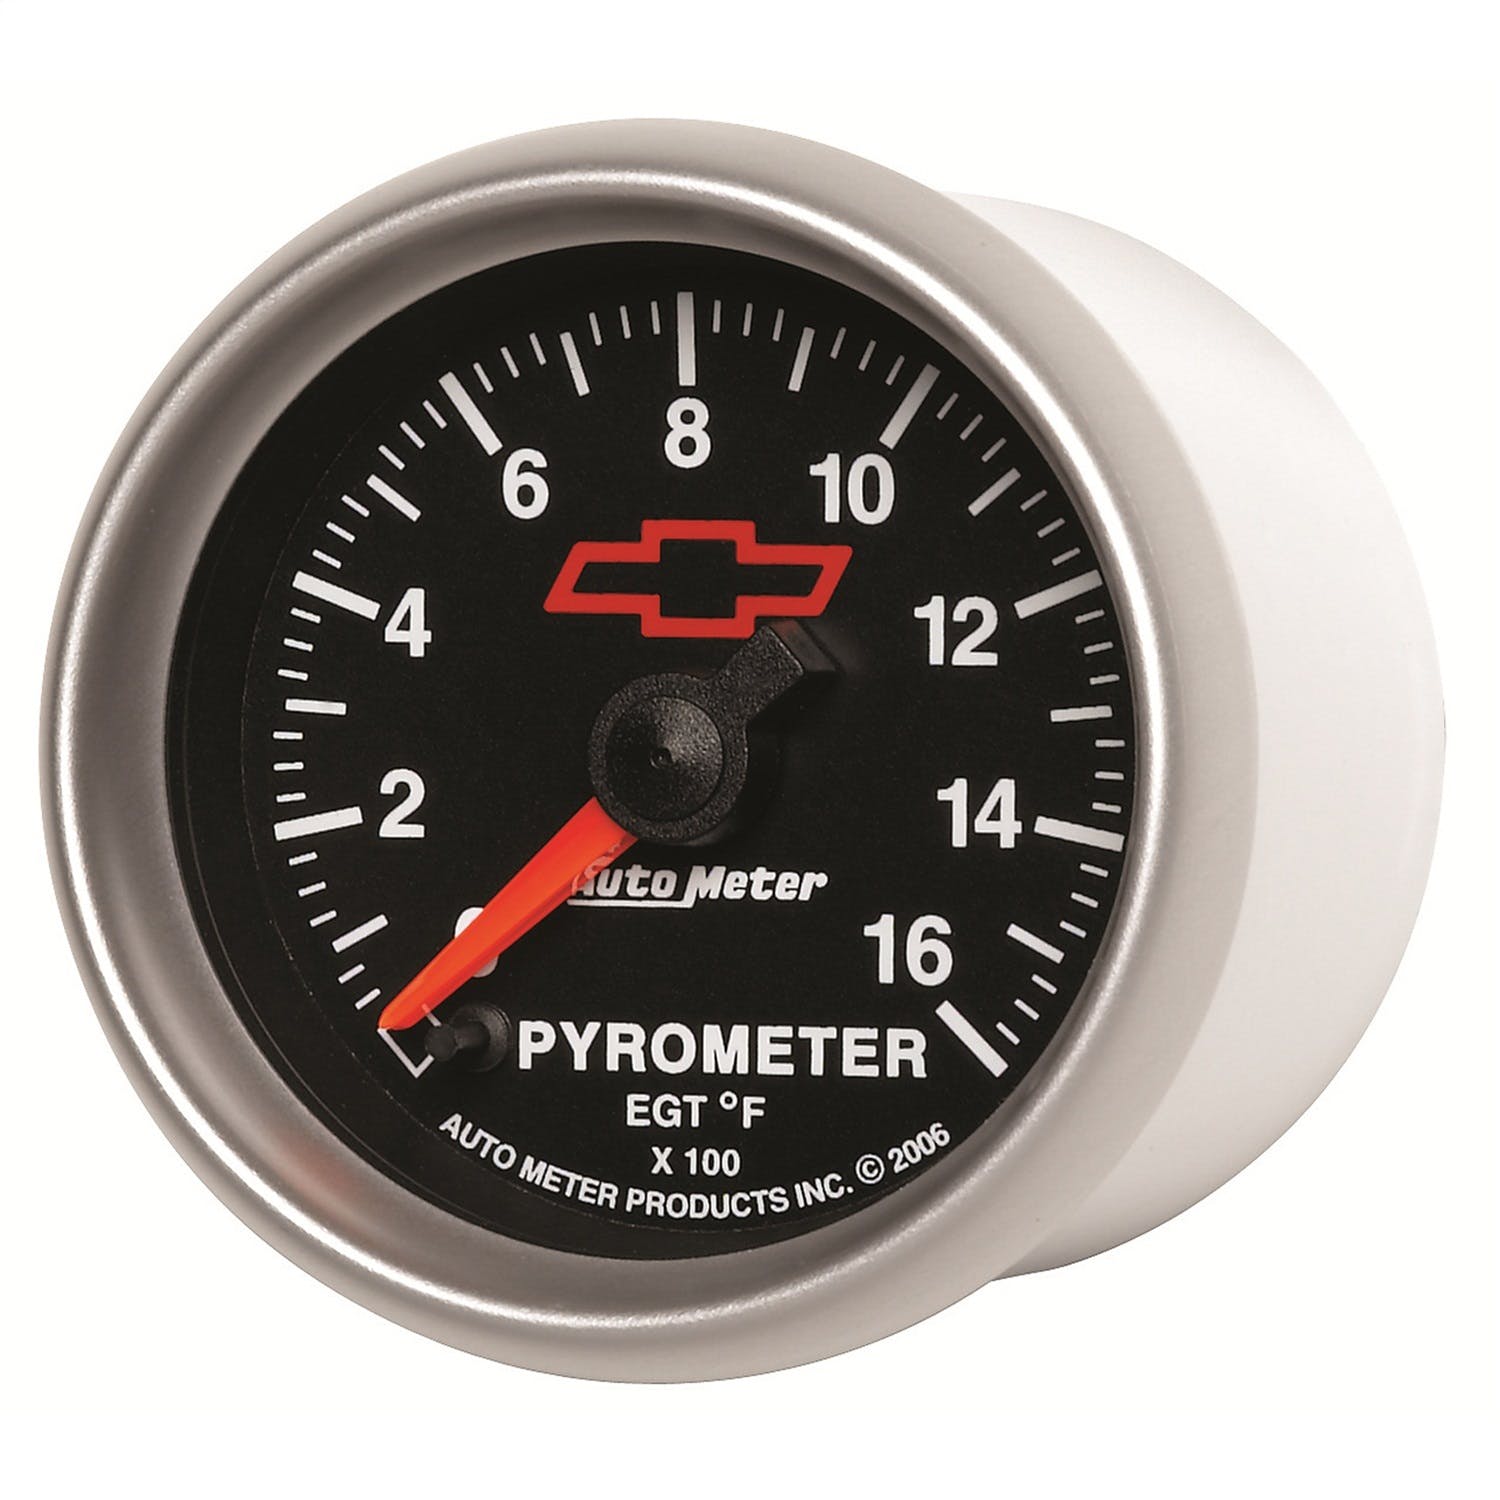 AutoMeter Products 3644-00406 2-1/16 Pyrometer Kit 0 1600 F Full Swp Elec, GM Red Bowtie